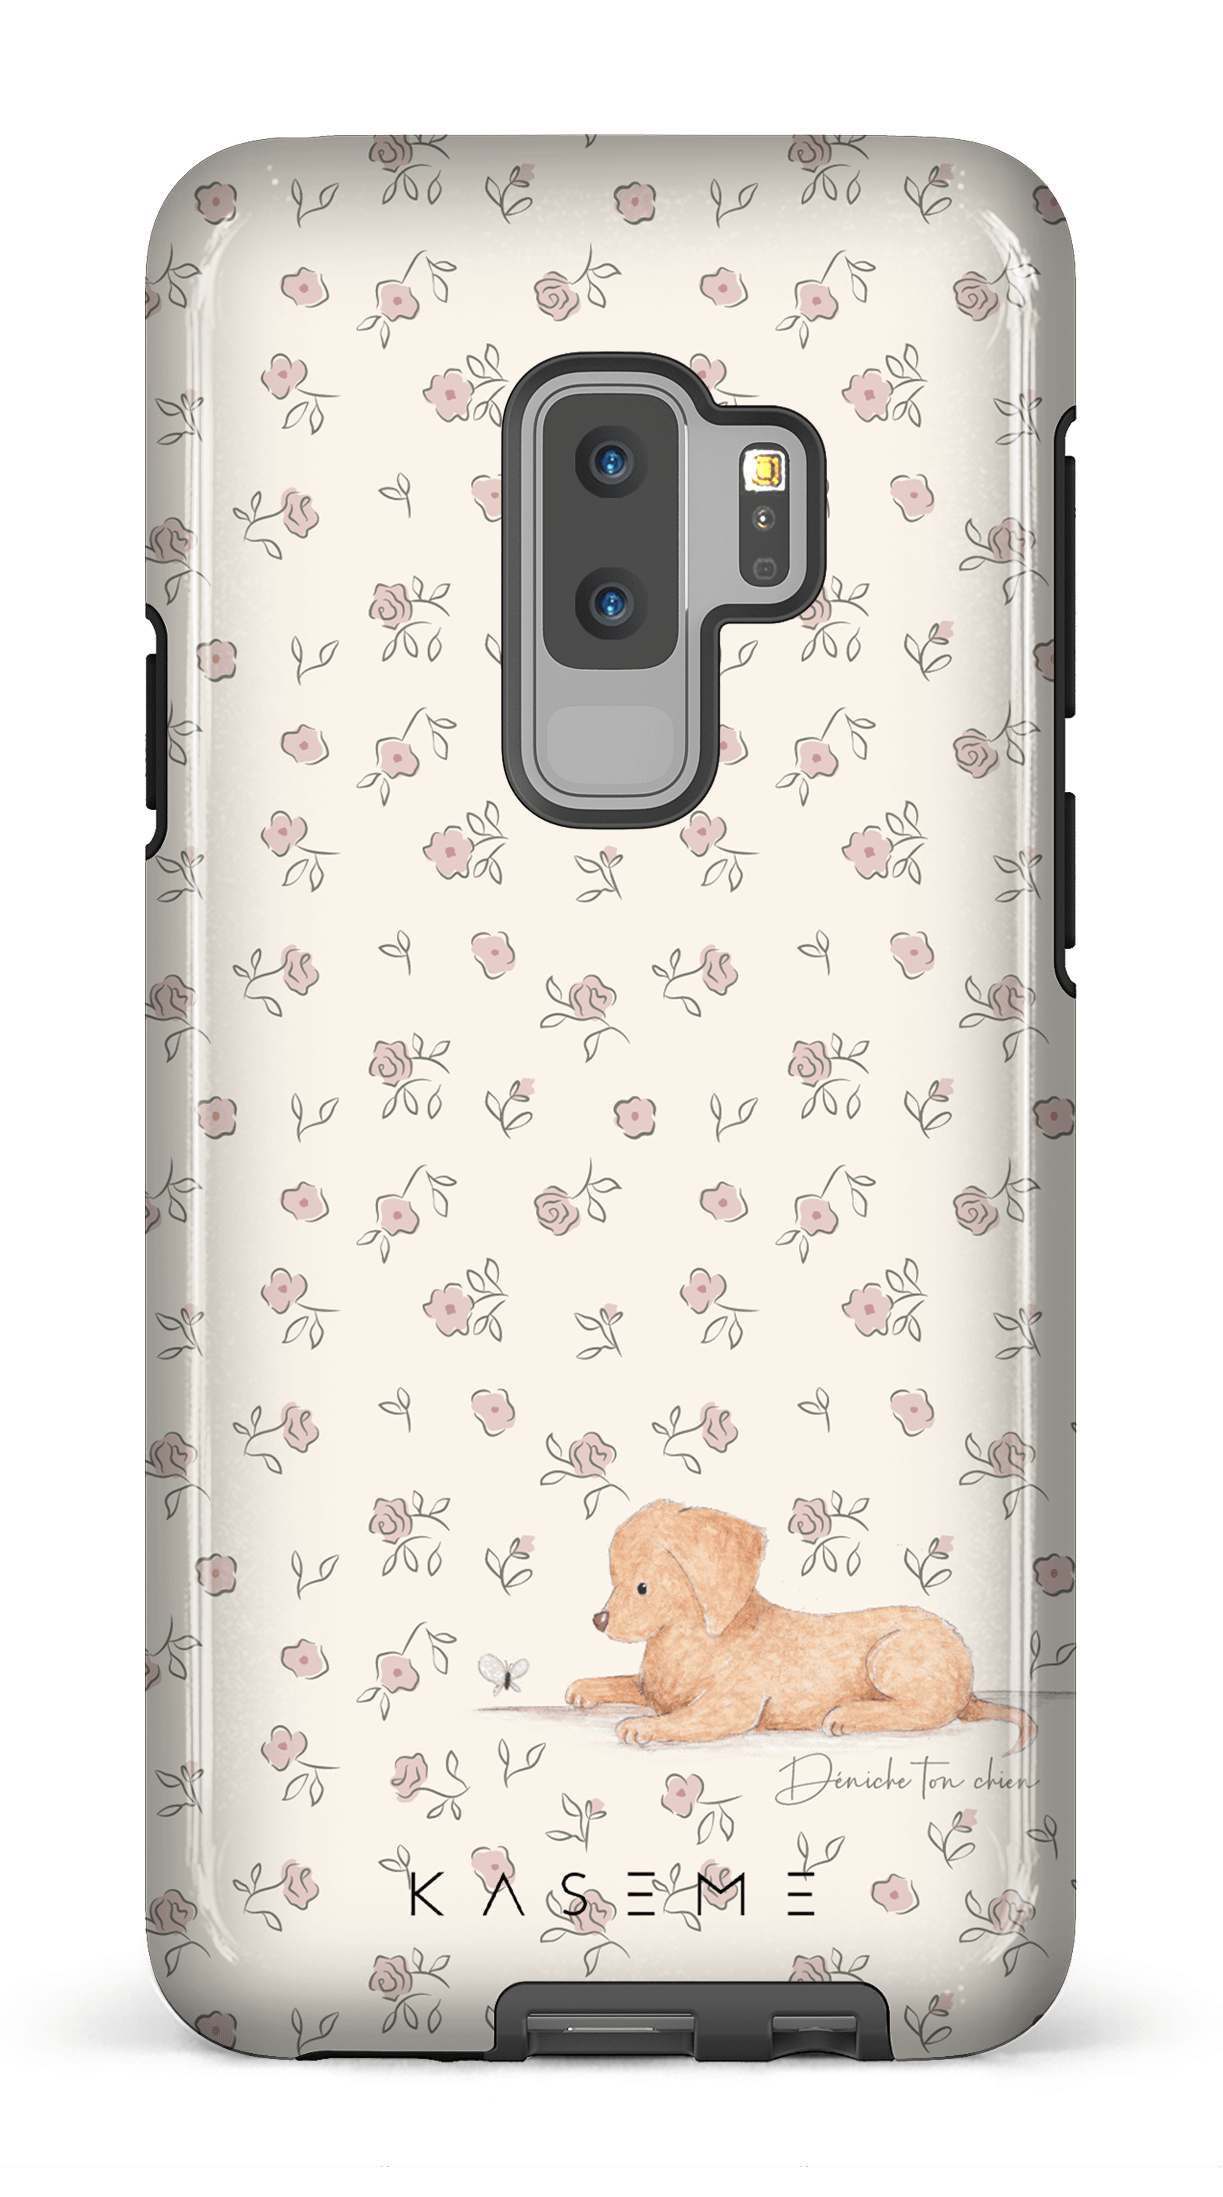 Fur-Ever A Dog Lover Pink by Déniche Ton Chien - Galaxy S9 Plus